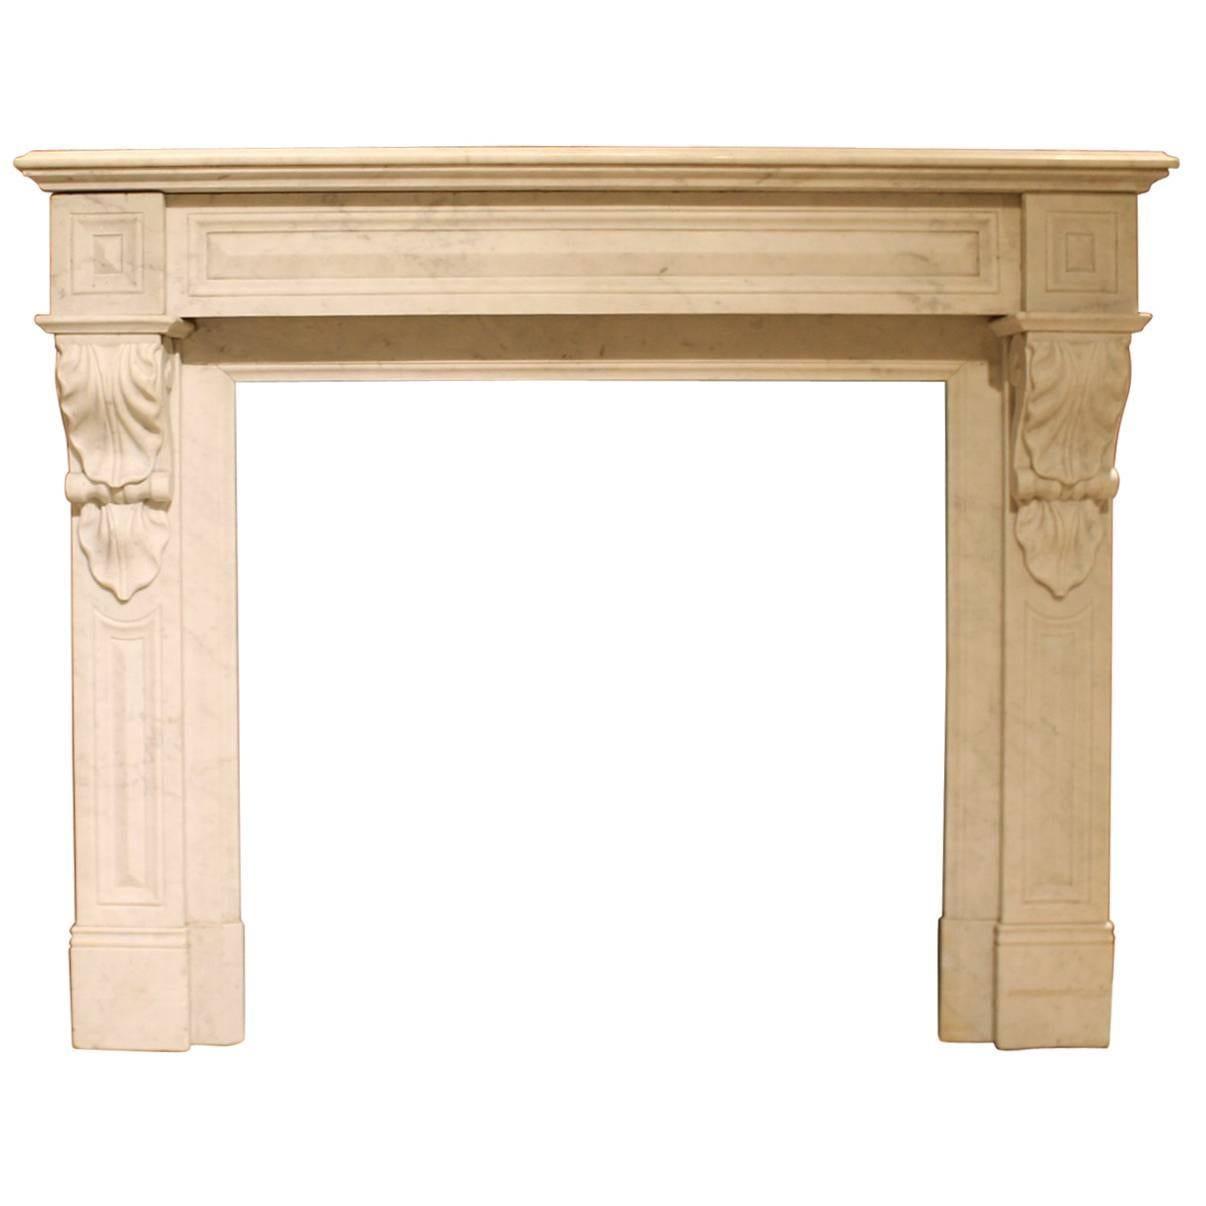 Antique White Marble Fireplace mantel from the 19th Century